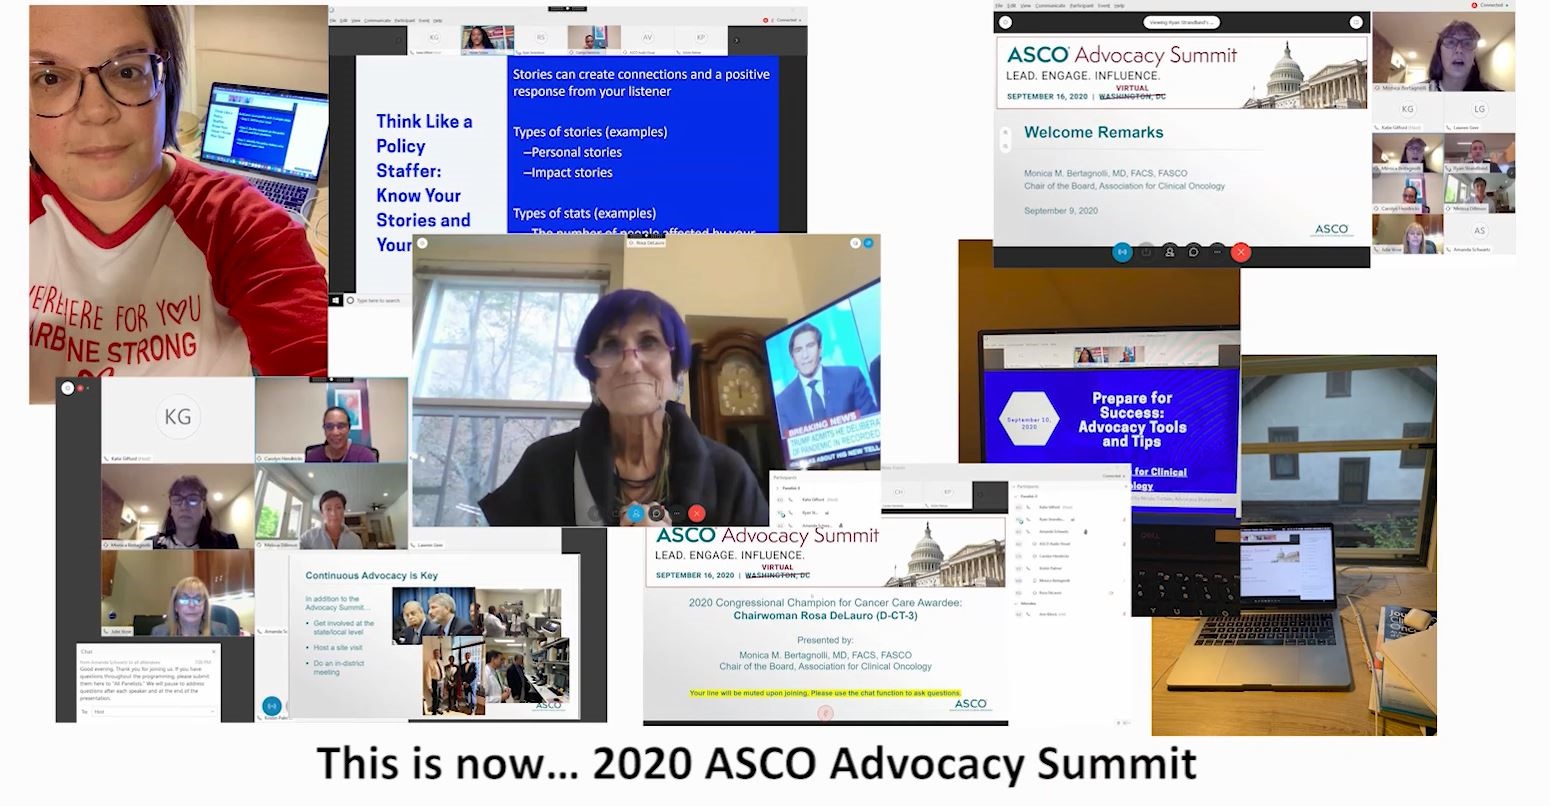 Images from 2020 Advocacy Summit